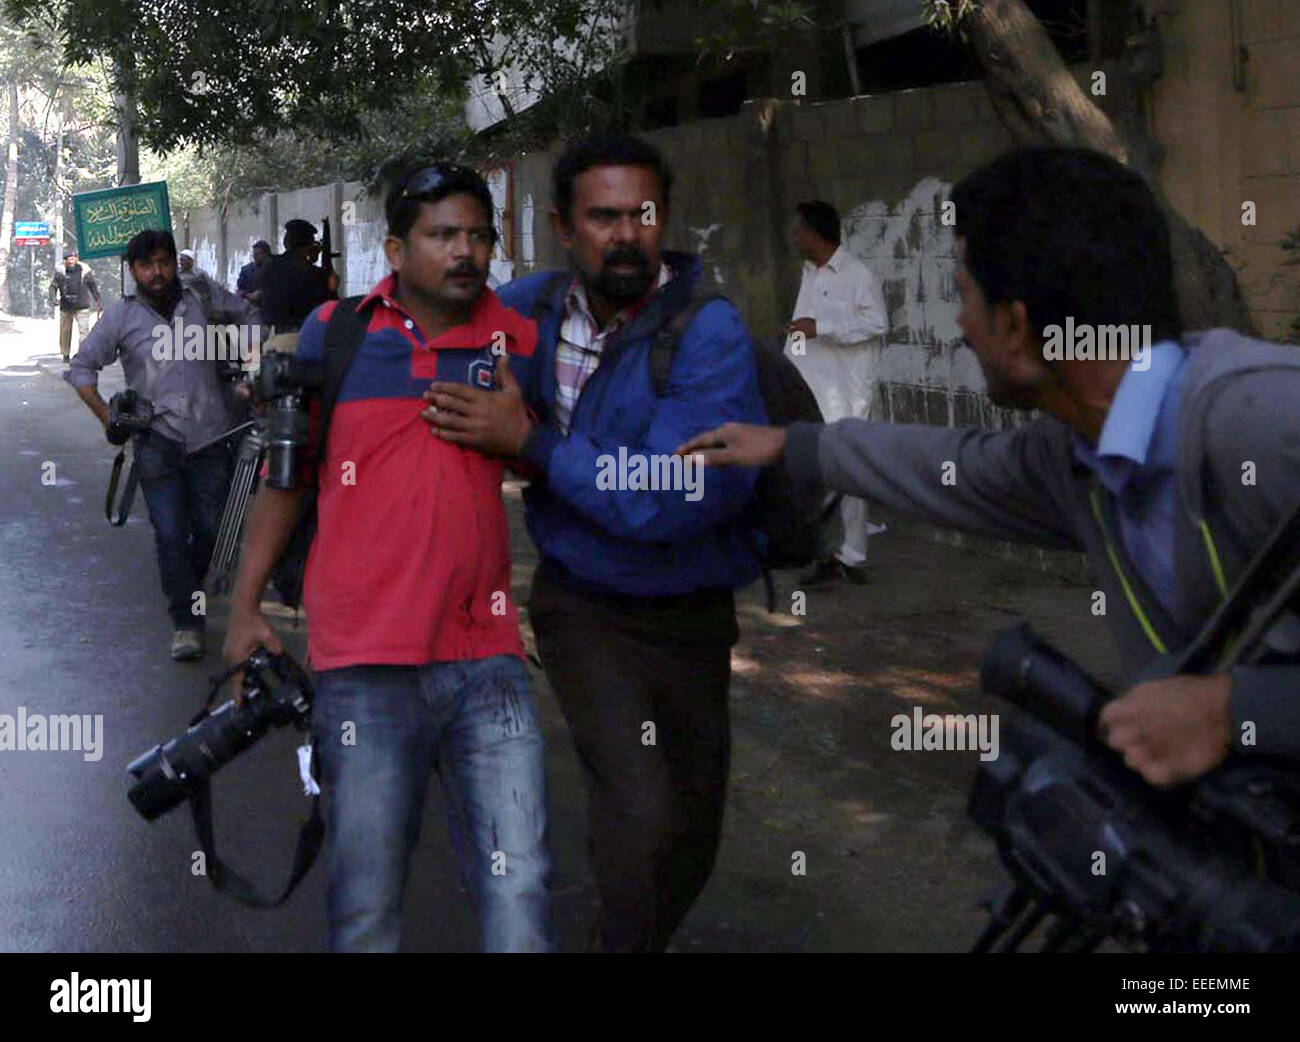 Injured AFP (Agence France-Presse) photo journalist Asif Hassan is leading to hospital while he has a lung punctured injury after gunshot during protest coverage near French Embassy in Karachi on Friday, January 16, 2015. Numerous activists of Islami Jamiat-e-Tulba hold a protest against publication of blasphemous caricatures in French Charlie Hebdo and moved ahead towards French Embassy whereas police used water cannon and tear gas shells to disperse aggressive protesters turn into a ferocious clash. Stock Photo